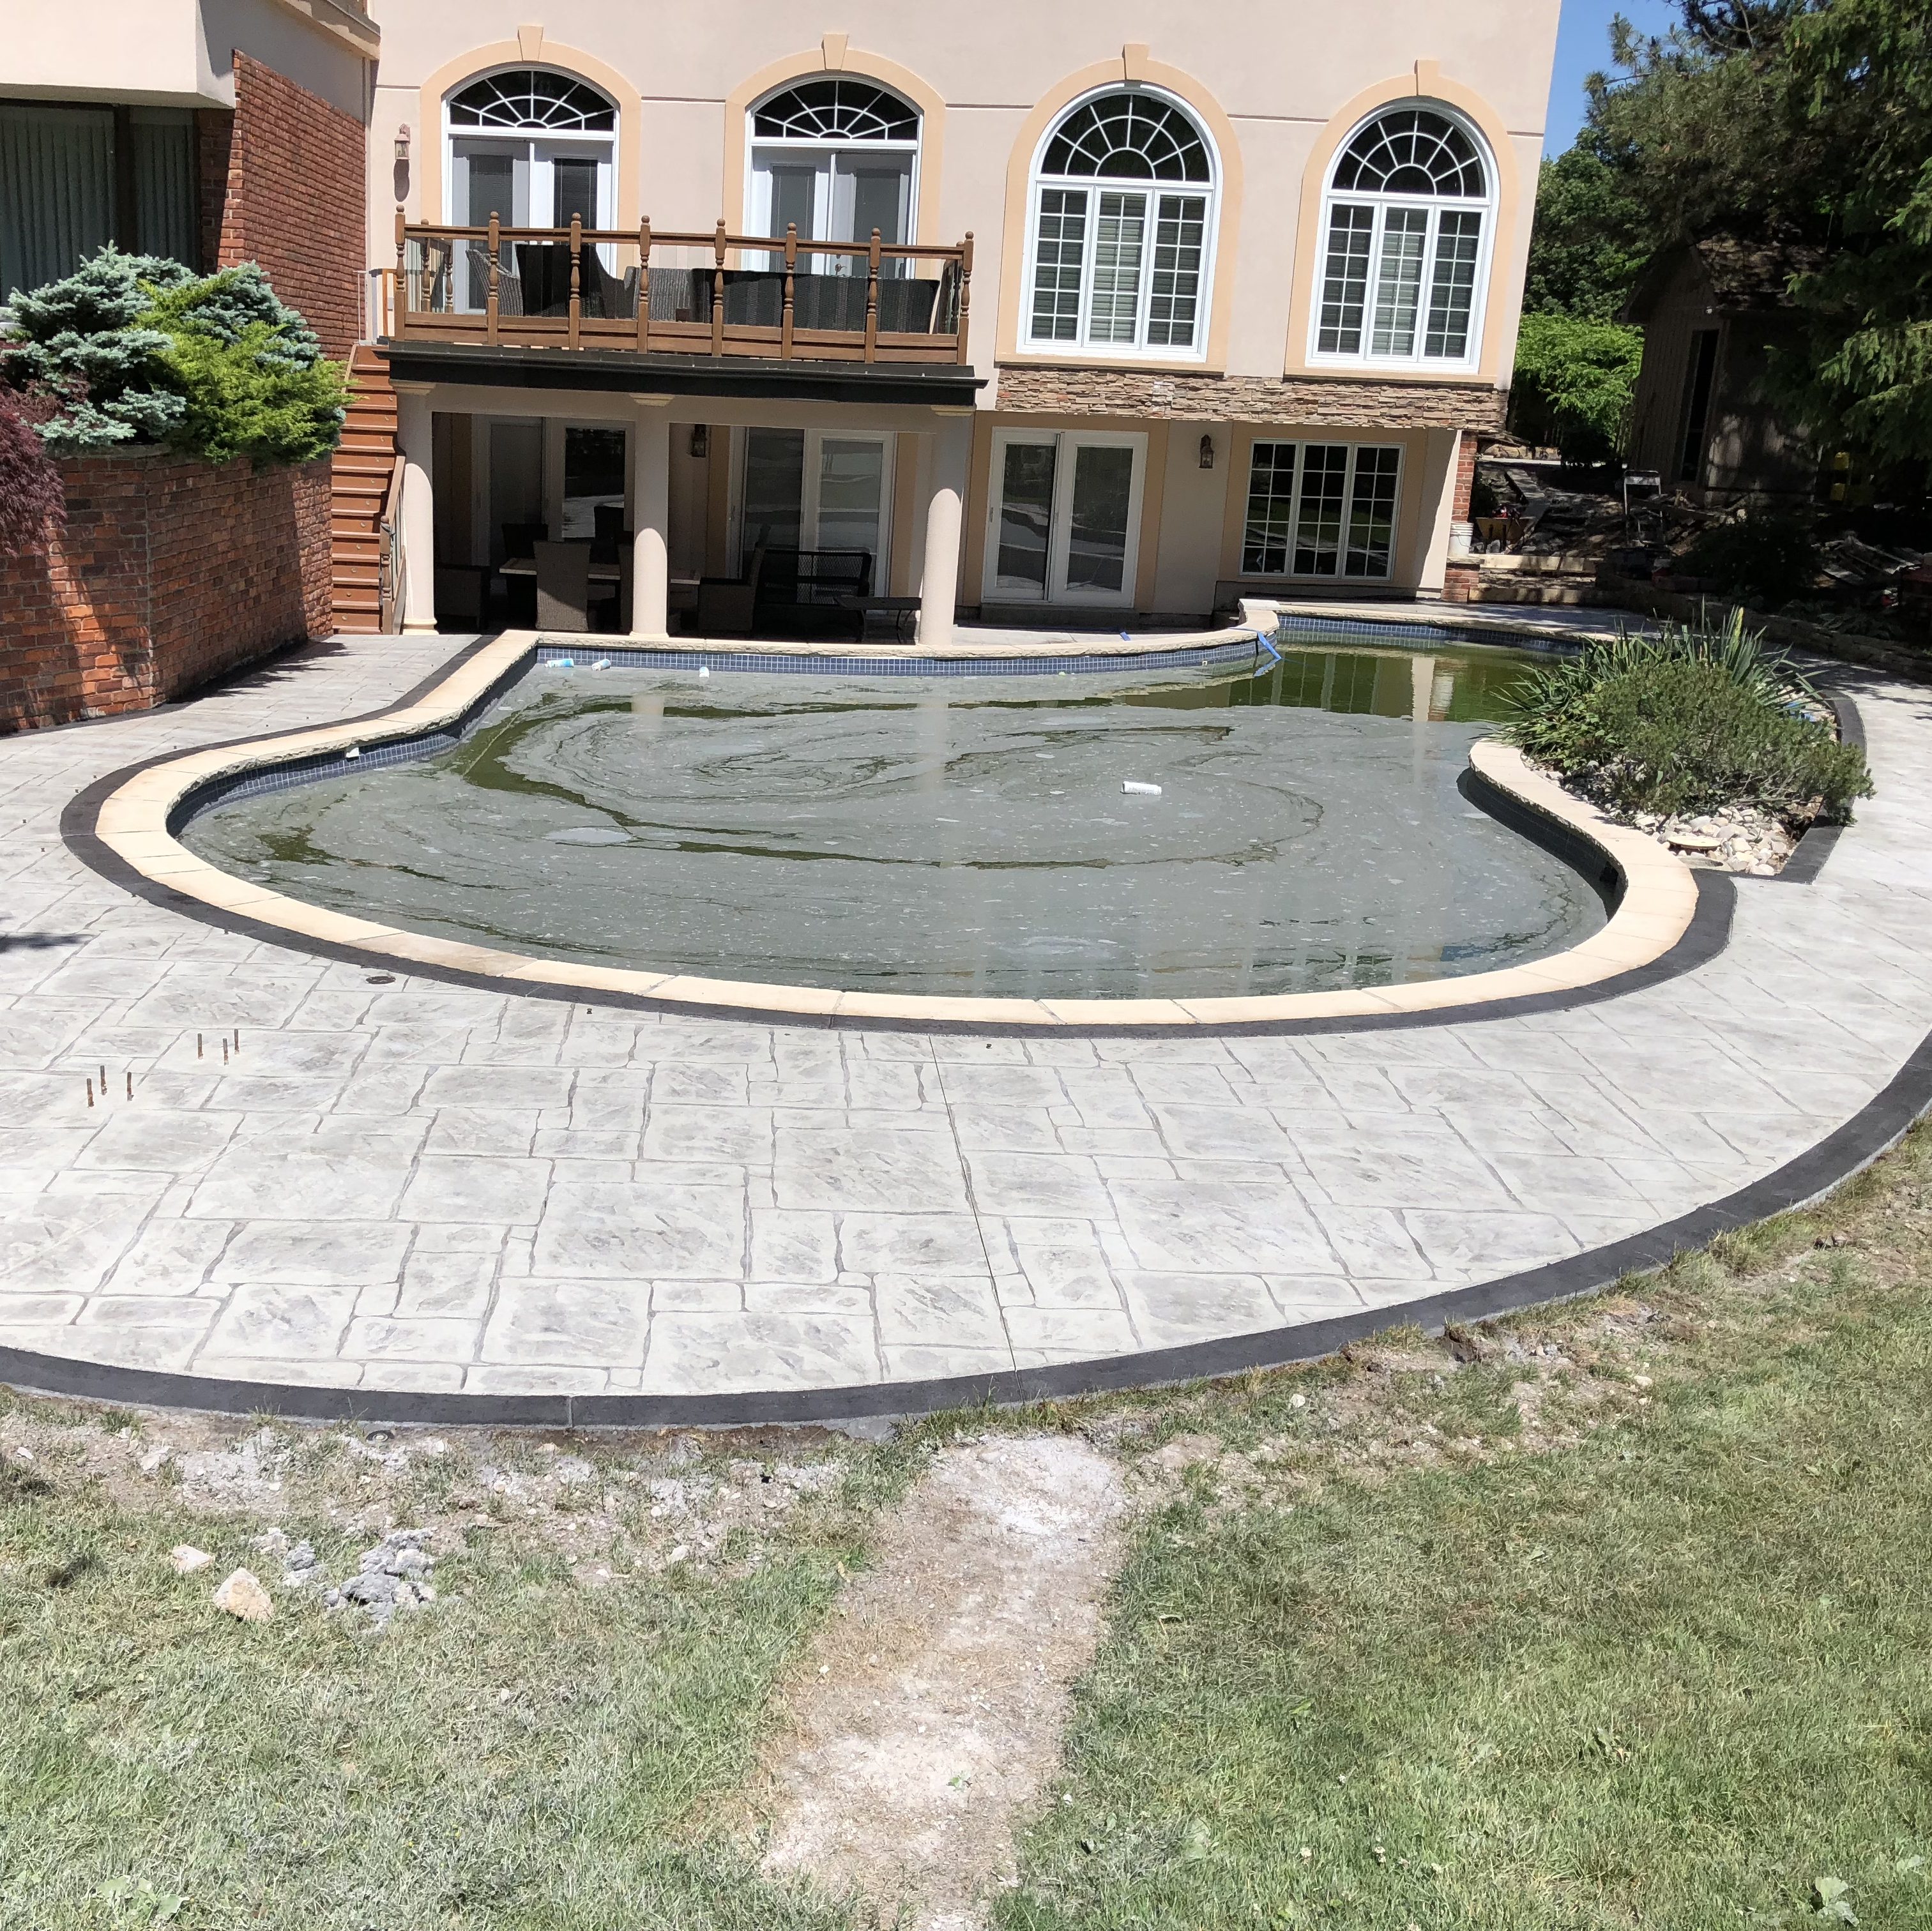 English Yorkstone Stamped Concrete Pool Deck with Separately Poured Border in London Ontario